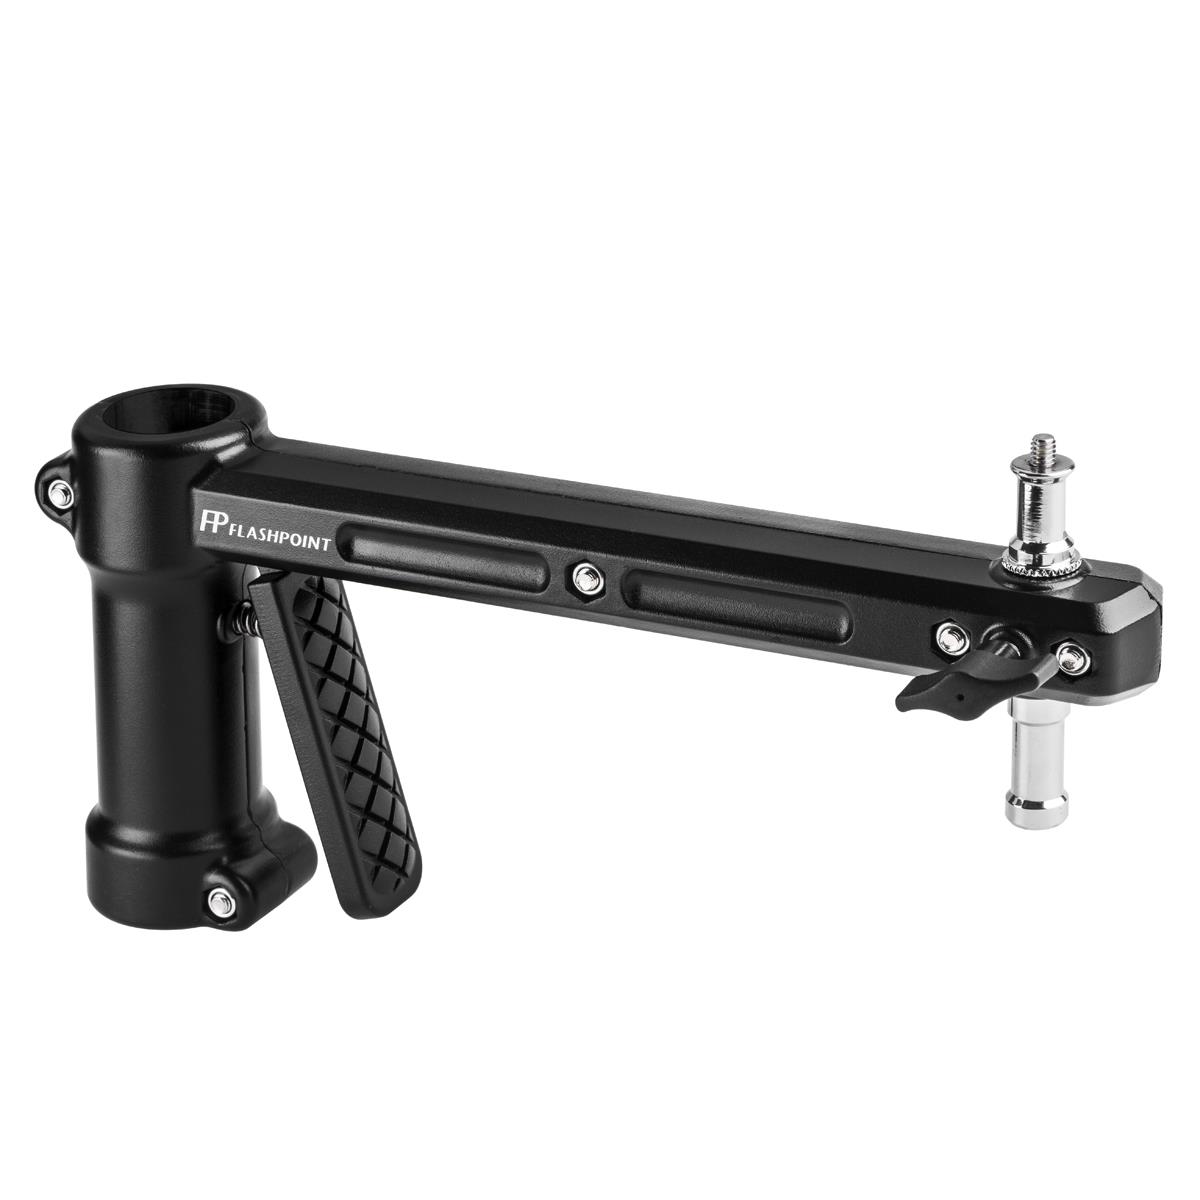 Image of Flashpoint Pistol Grip for Pistol Grip Stand